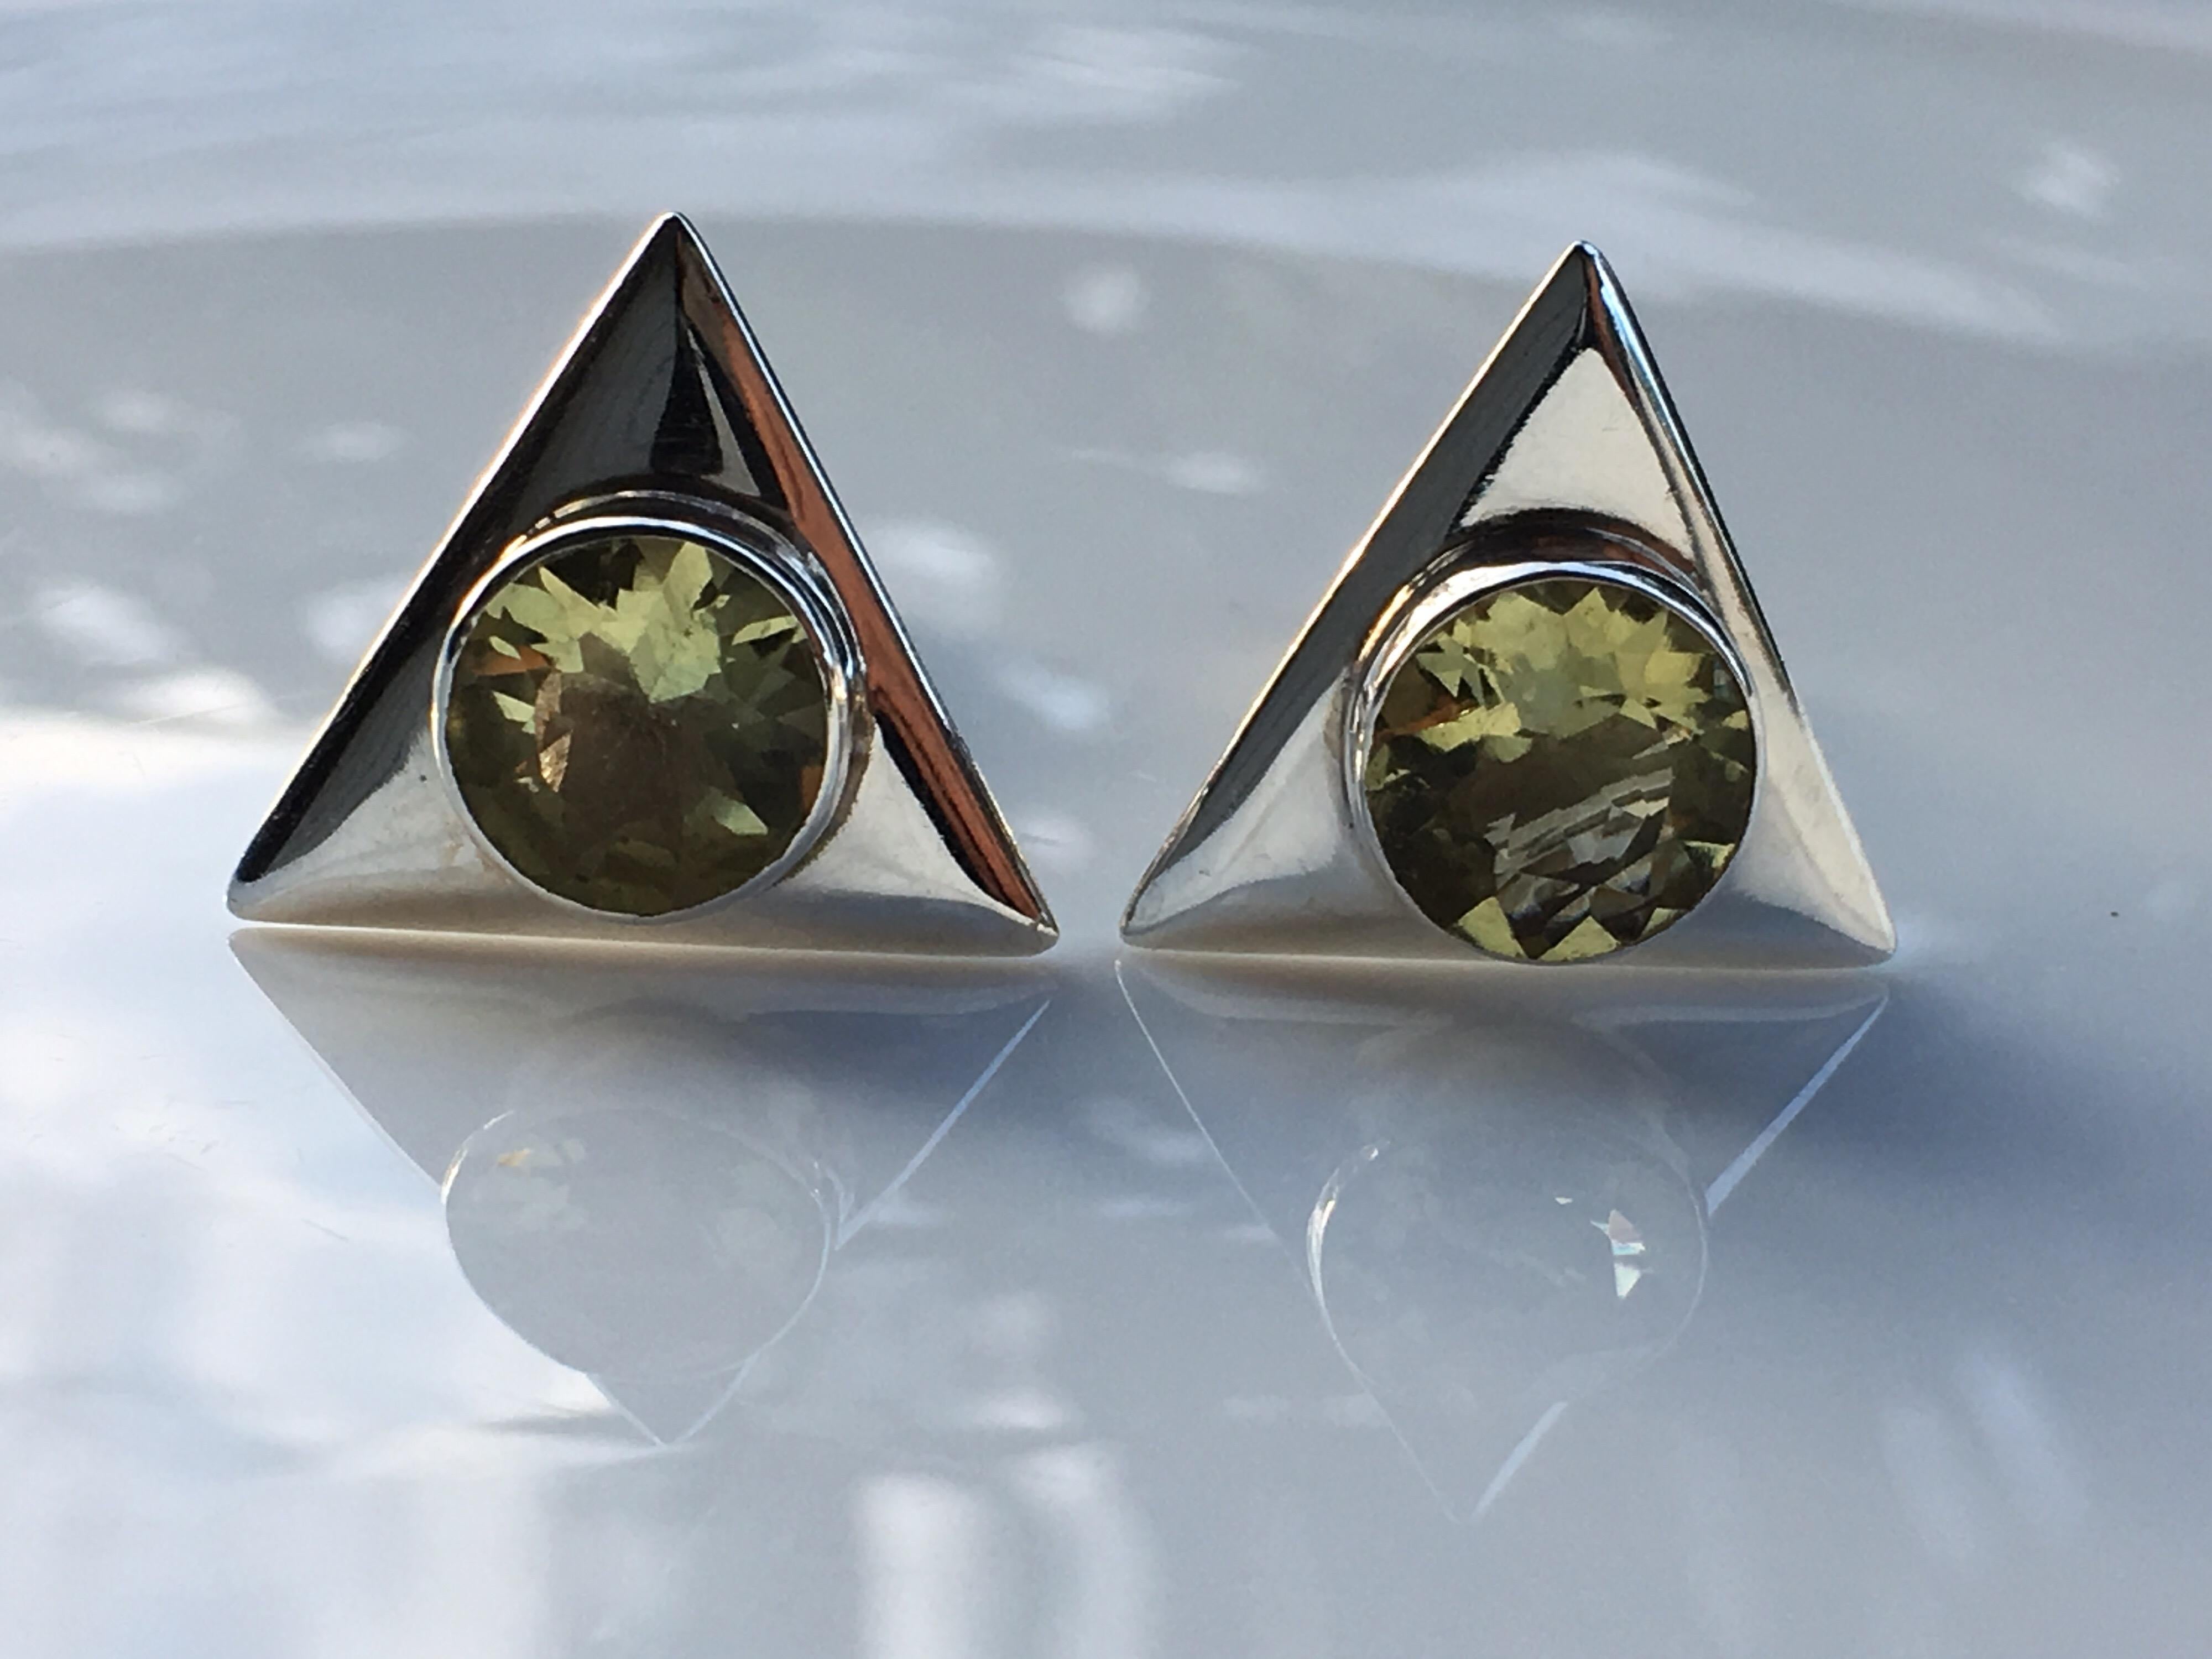 Triangular shape with round lemon quartz Cufflinks is set in sterling silver hand crafted one of a kind cufflinks.
Round Lemon quartz is 9 MM Approx 3 carat.Total weight of the cufflinks is 10.28 carat. Size of Triangle is 16 MM.

